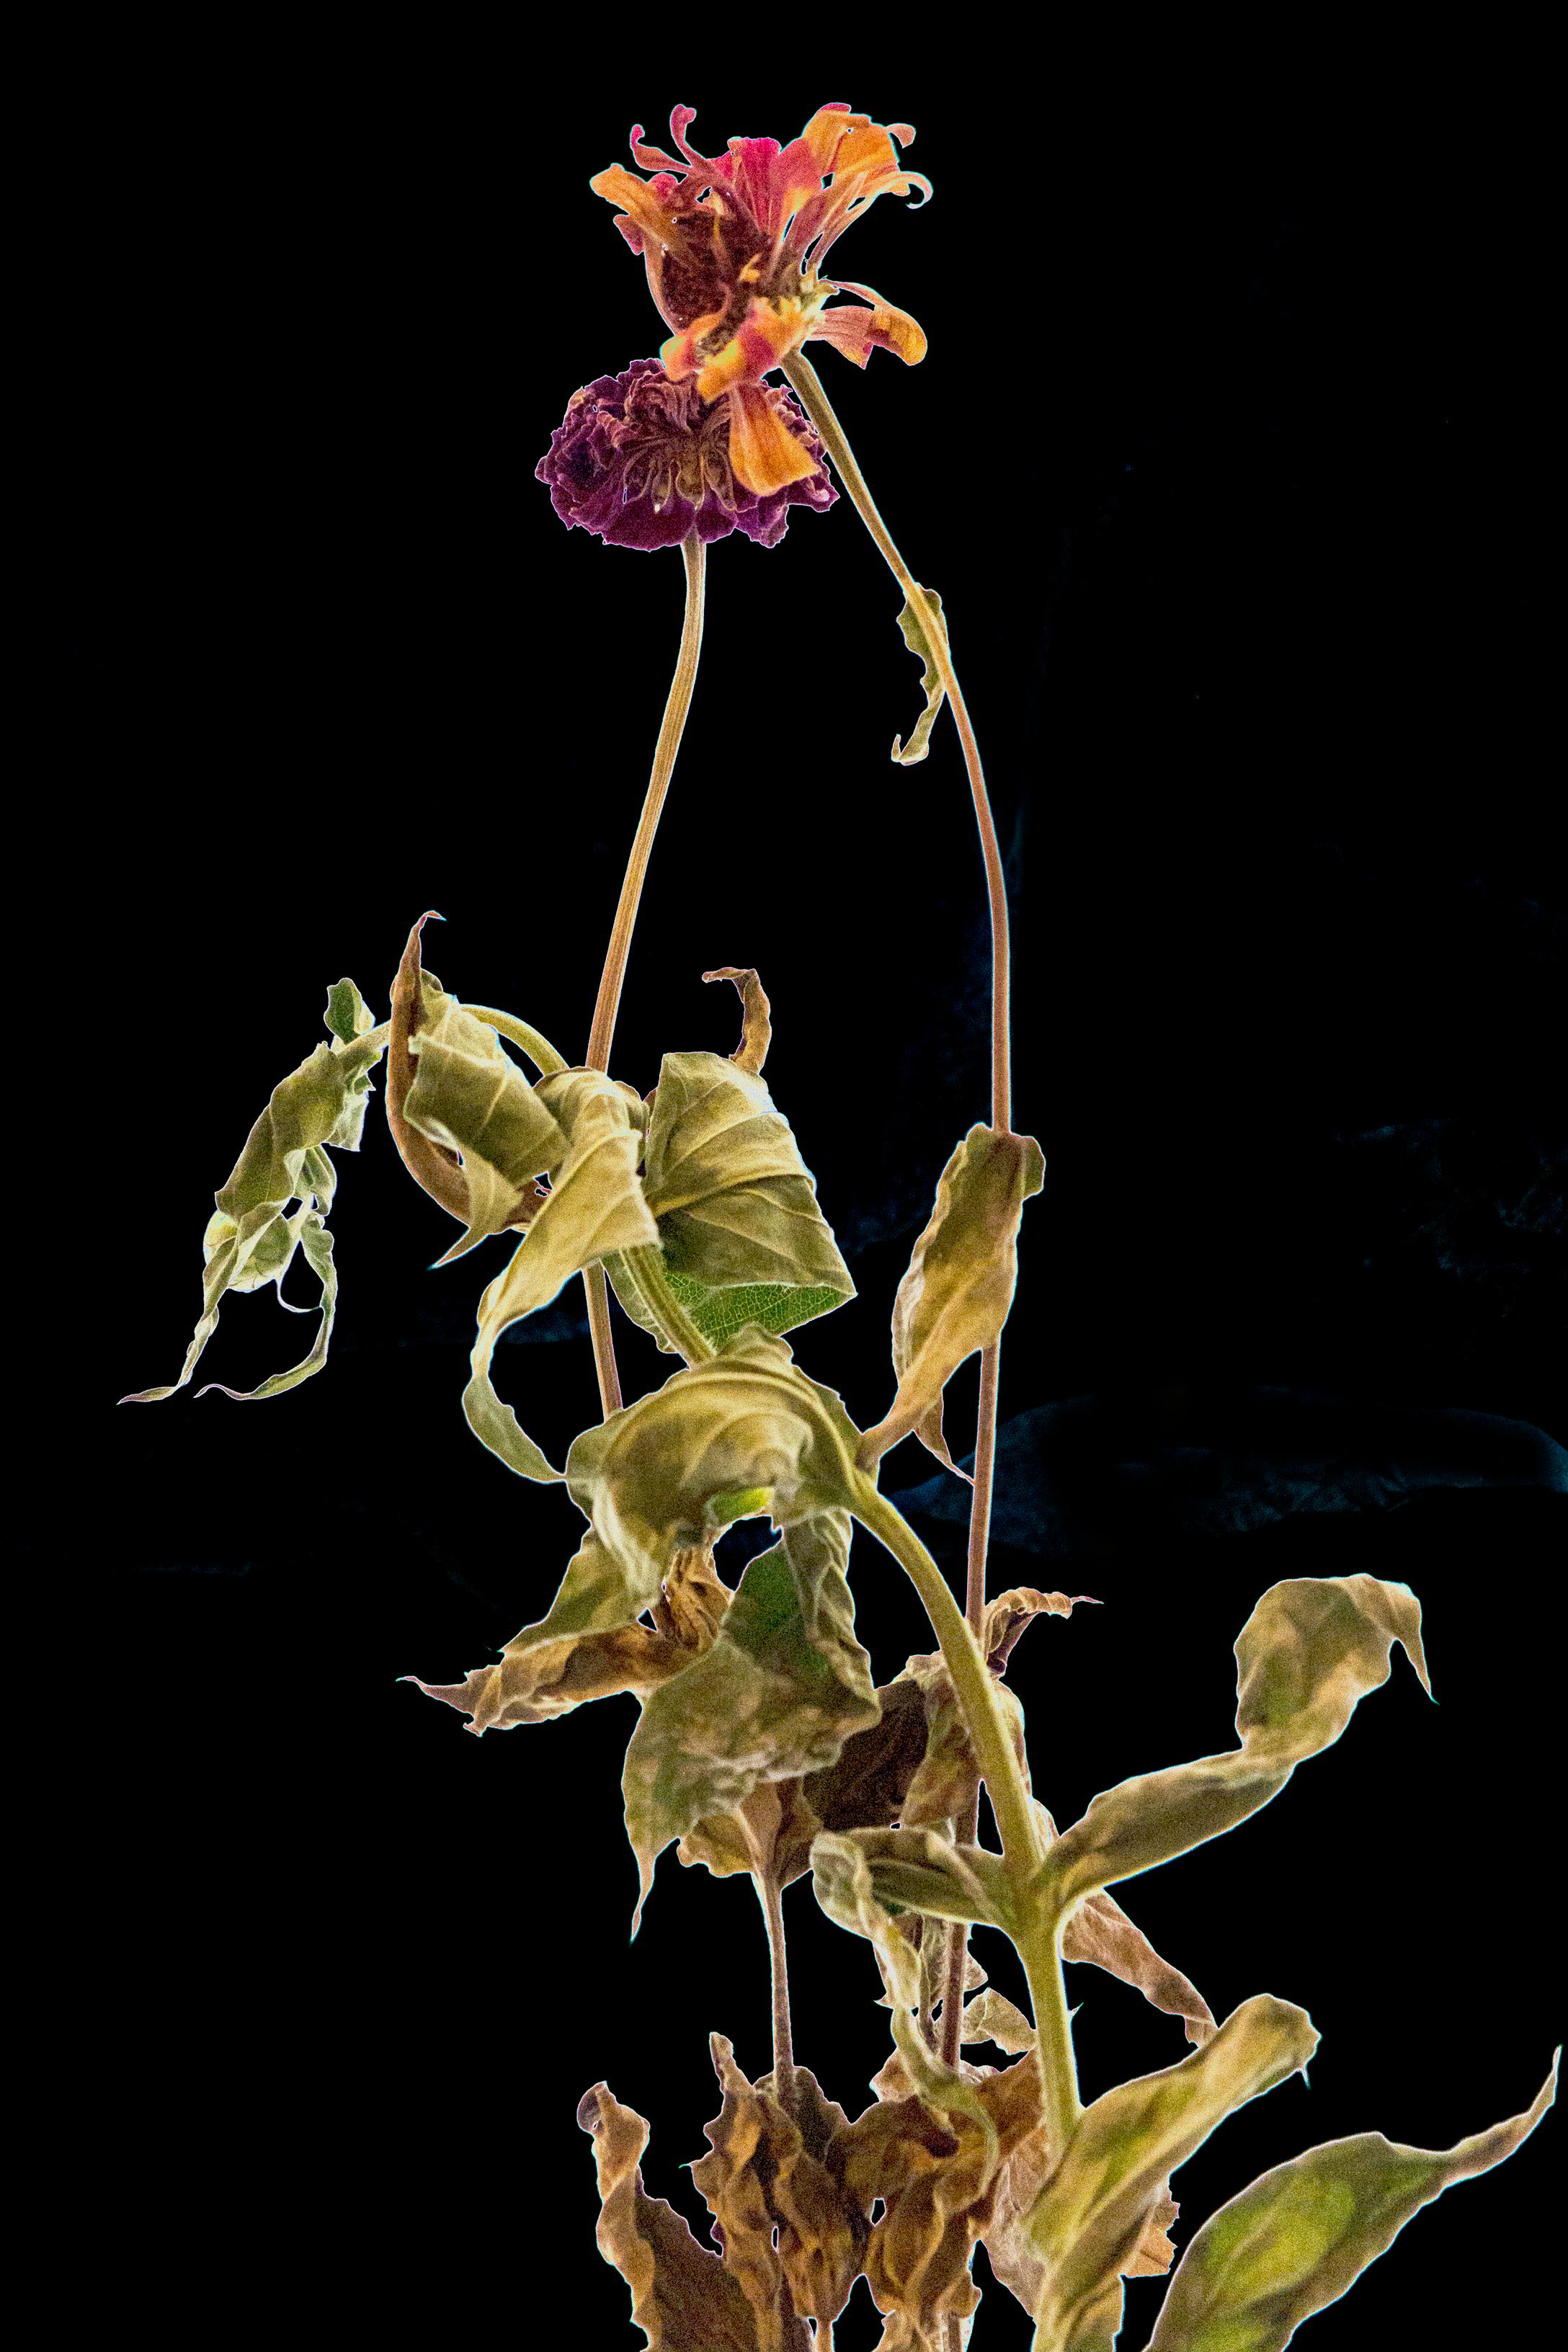 Paul Cava Abstract Photograph - Floral Study 13: still life color photograph w/ dried flowers on black field, lg